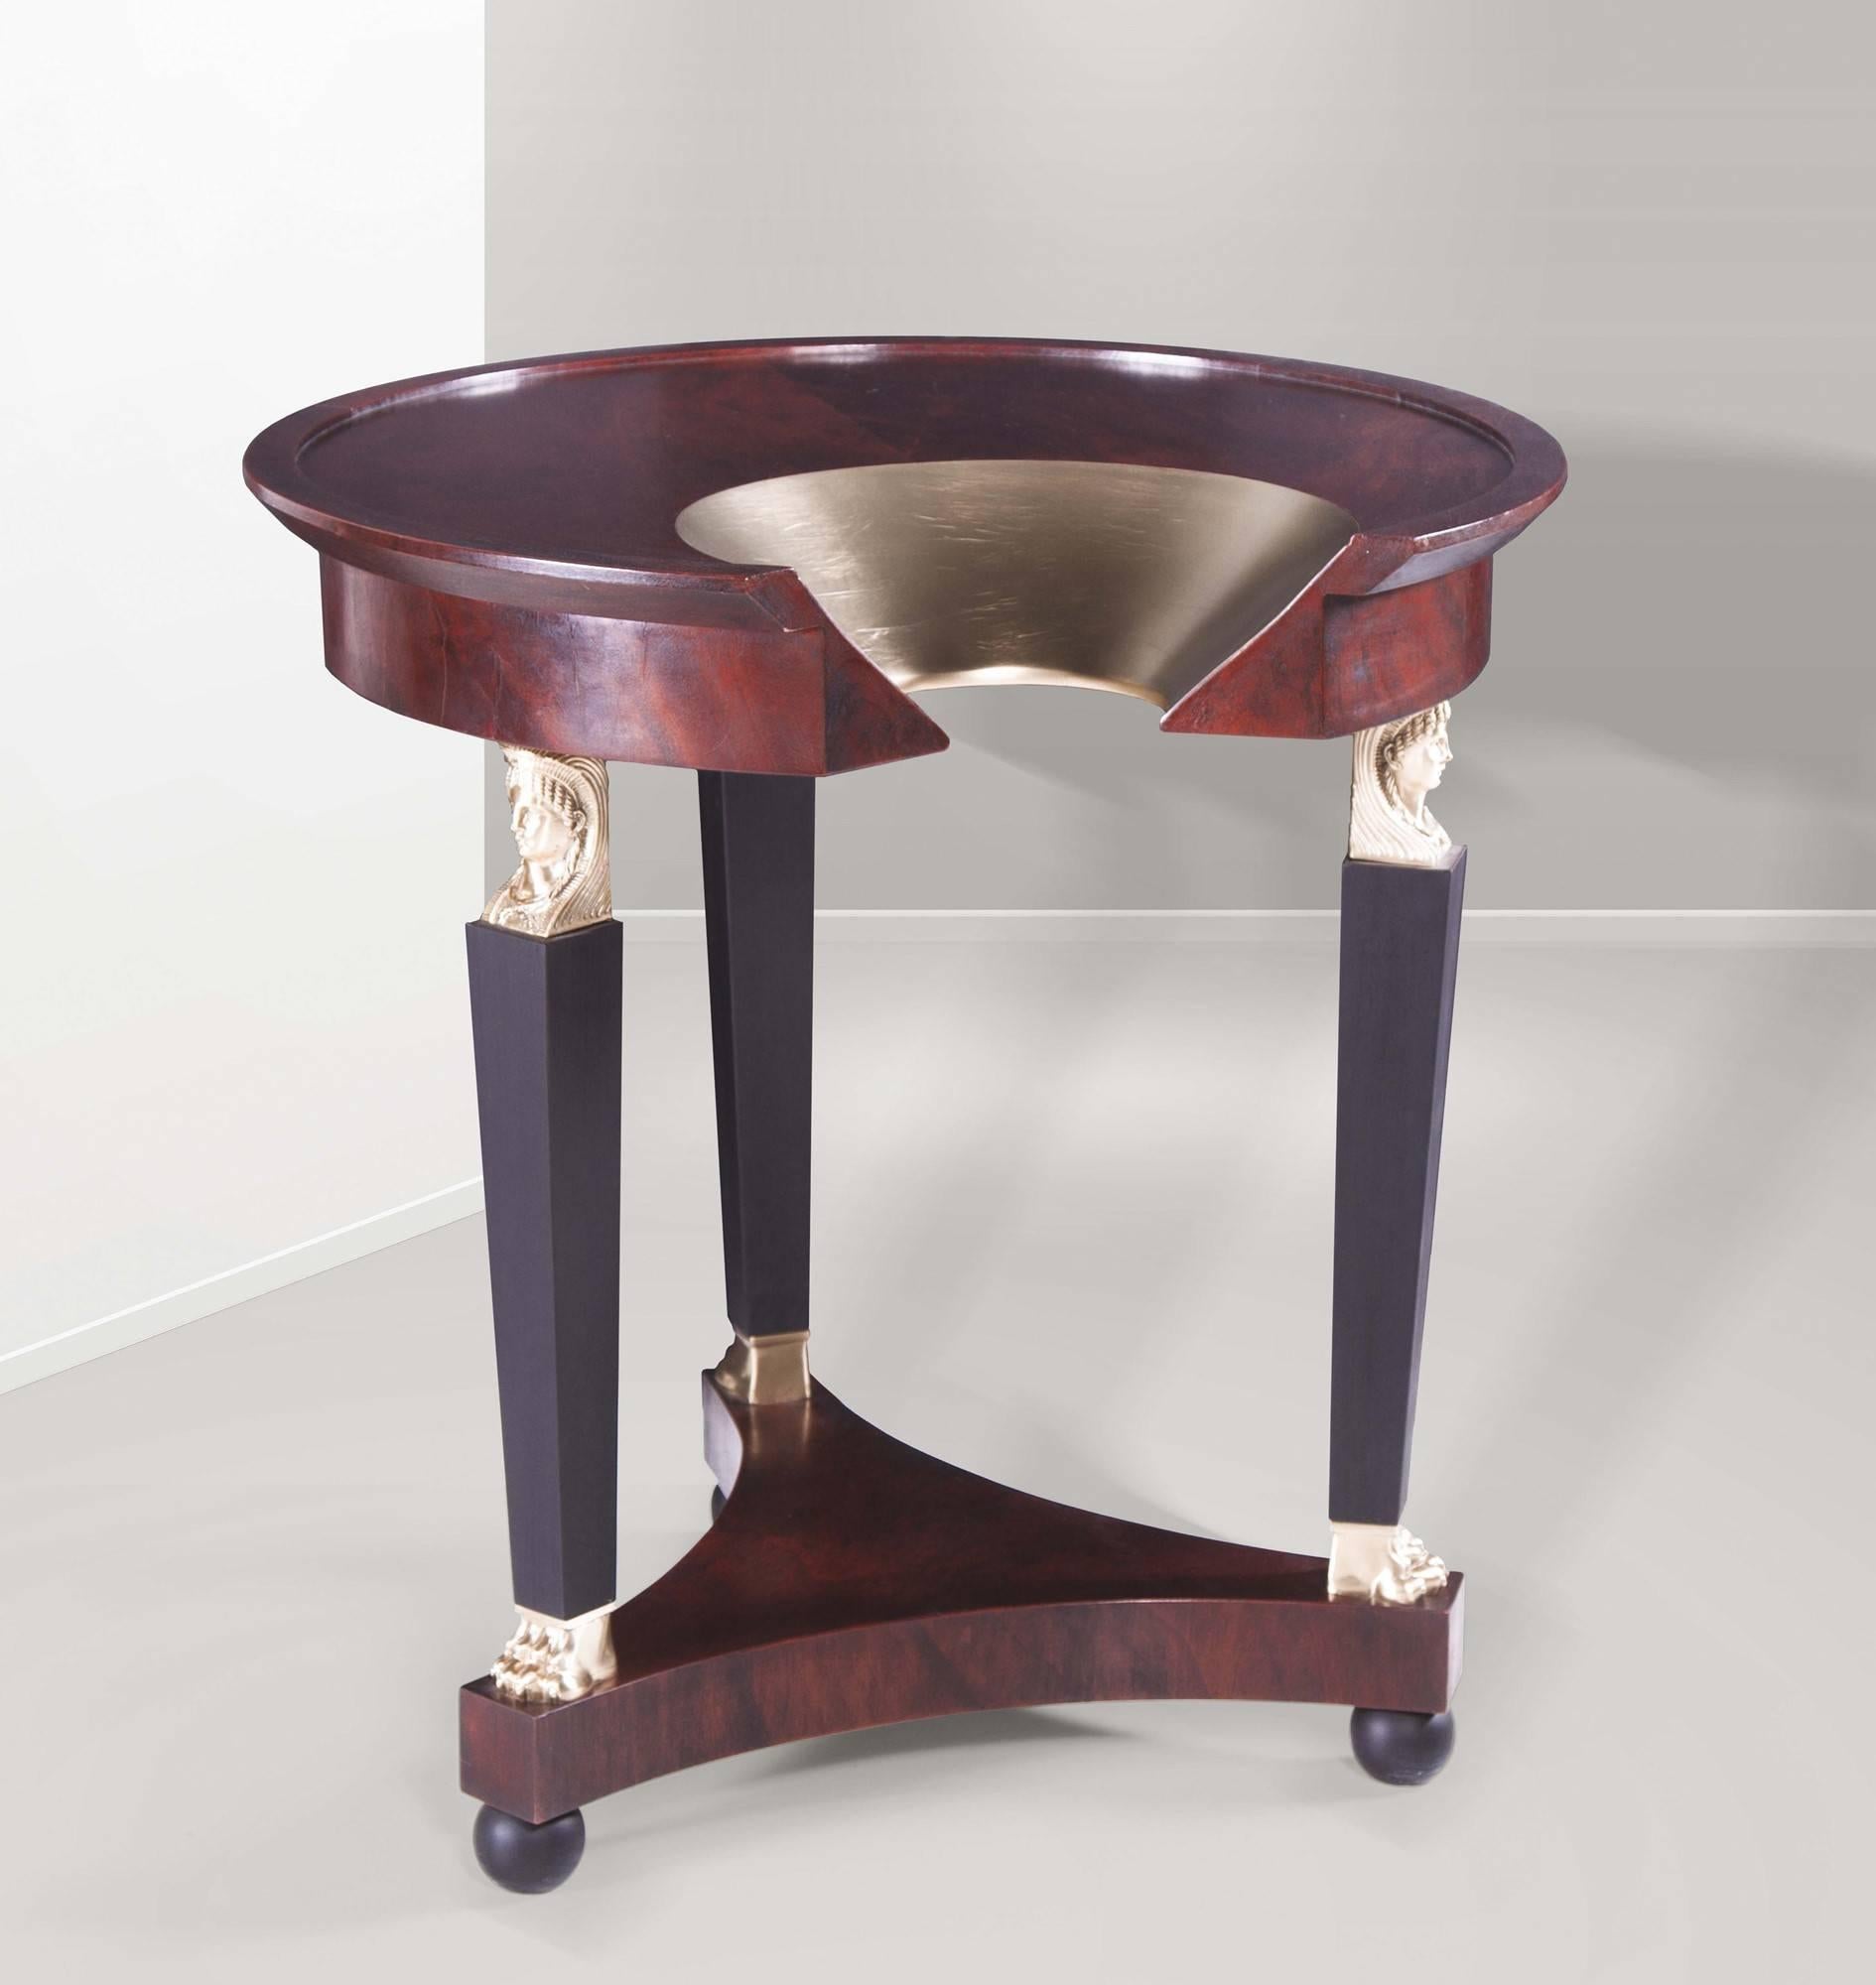 F* gueridon table with top in mahogany and ebony legs designed by Ferruccio Laviani and produced by Fratelli Boffi, 2010 circa, Italy.